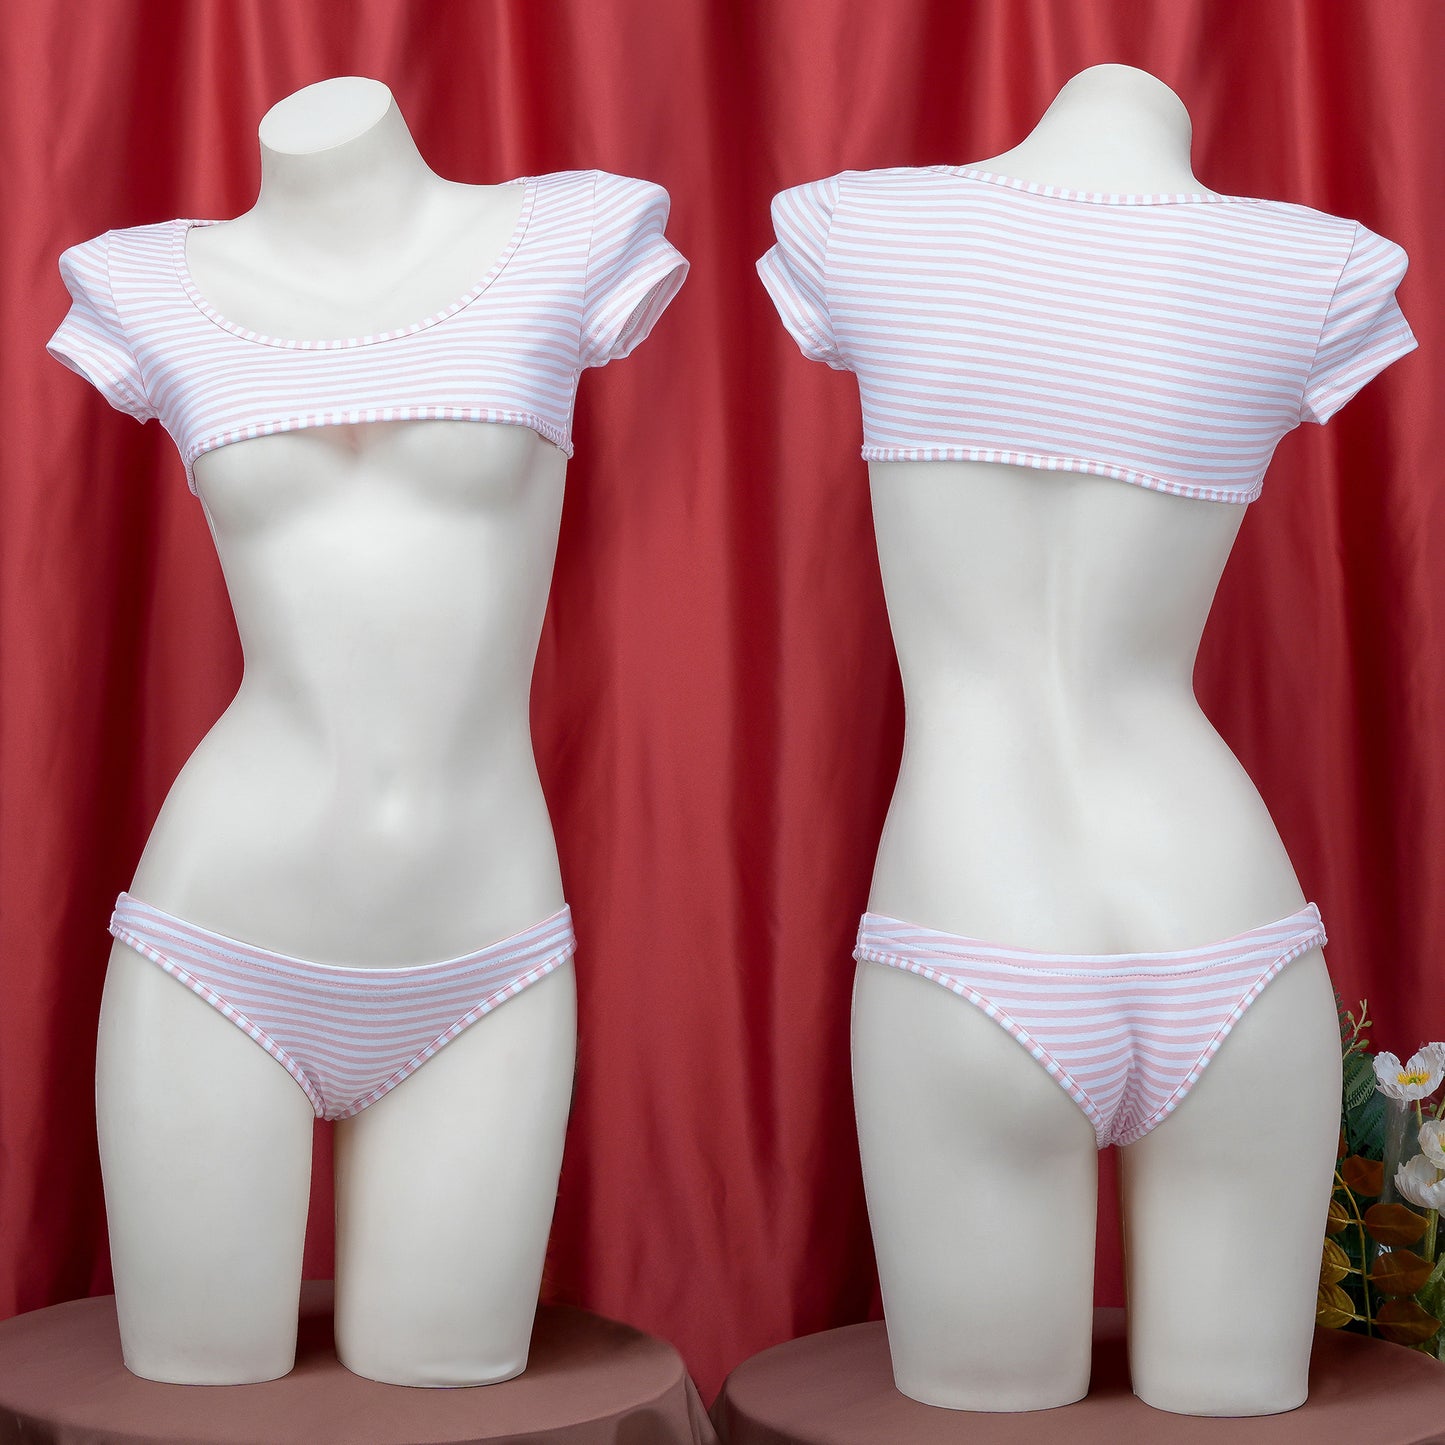 Pink and White Stripe Crop Top Lingerie Set - Femboy Fashion